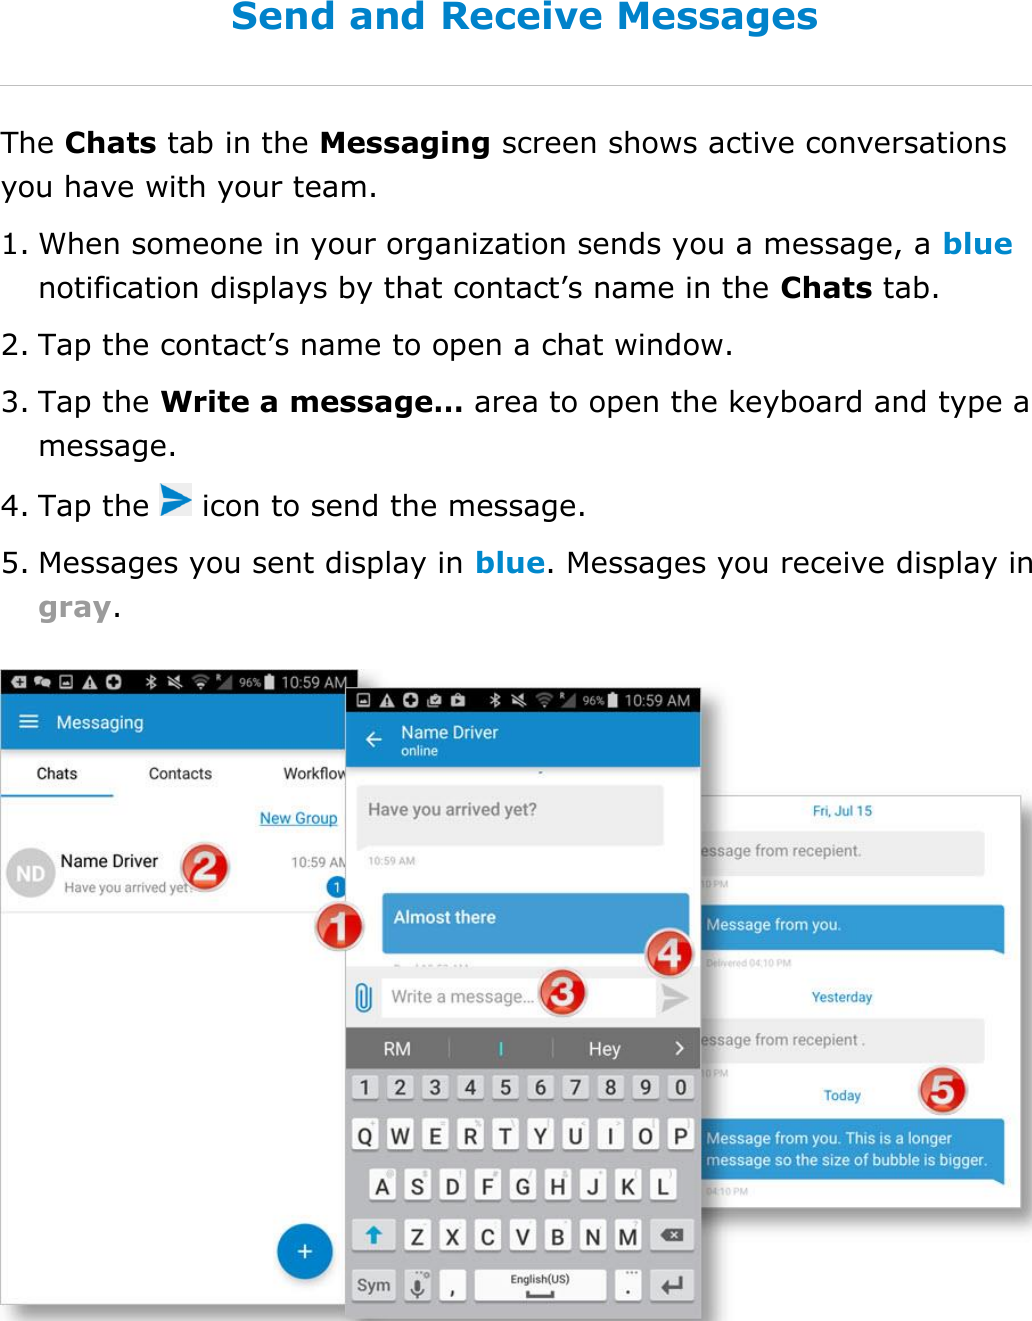 Send Messages, Forms, and Workflows DriverConnect User Guide  69 © 2016-2017, Rand McNally, Inc. Send and Receive Messages The Chats tab in the Messaging screen shows active conversations you have with your team. 1. When someone in your organization sends you a message, a blue notification displays by that contact’s name in the Chats tab. 2. Tap the contact’s name to open a chat window. 3. Tap the Write a message… area to open the keyboard and type a message. 4. Tap the   icon to send the message. 5. Messages you sent display in blue. Messages you receive display in gray.    